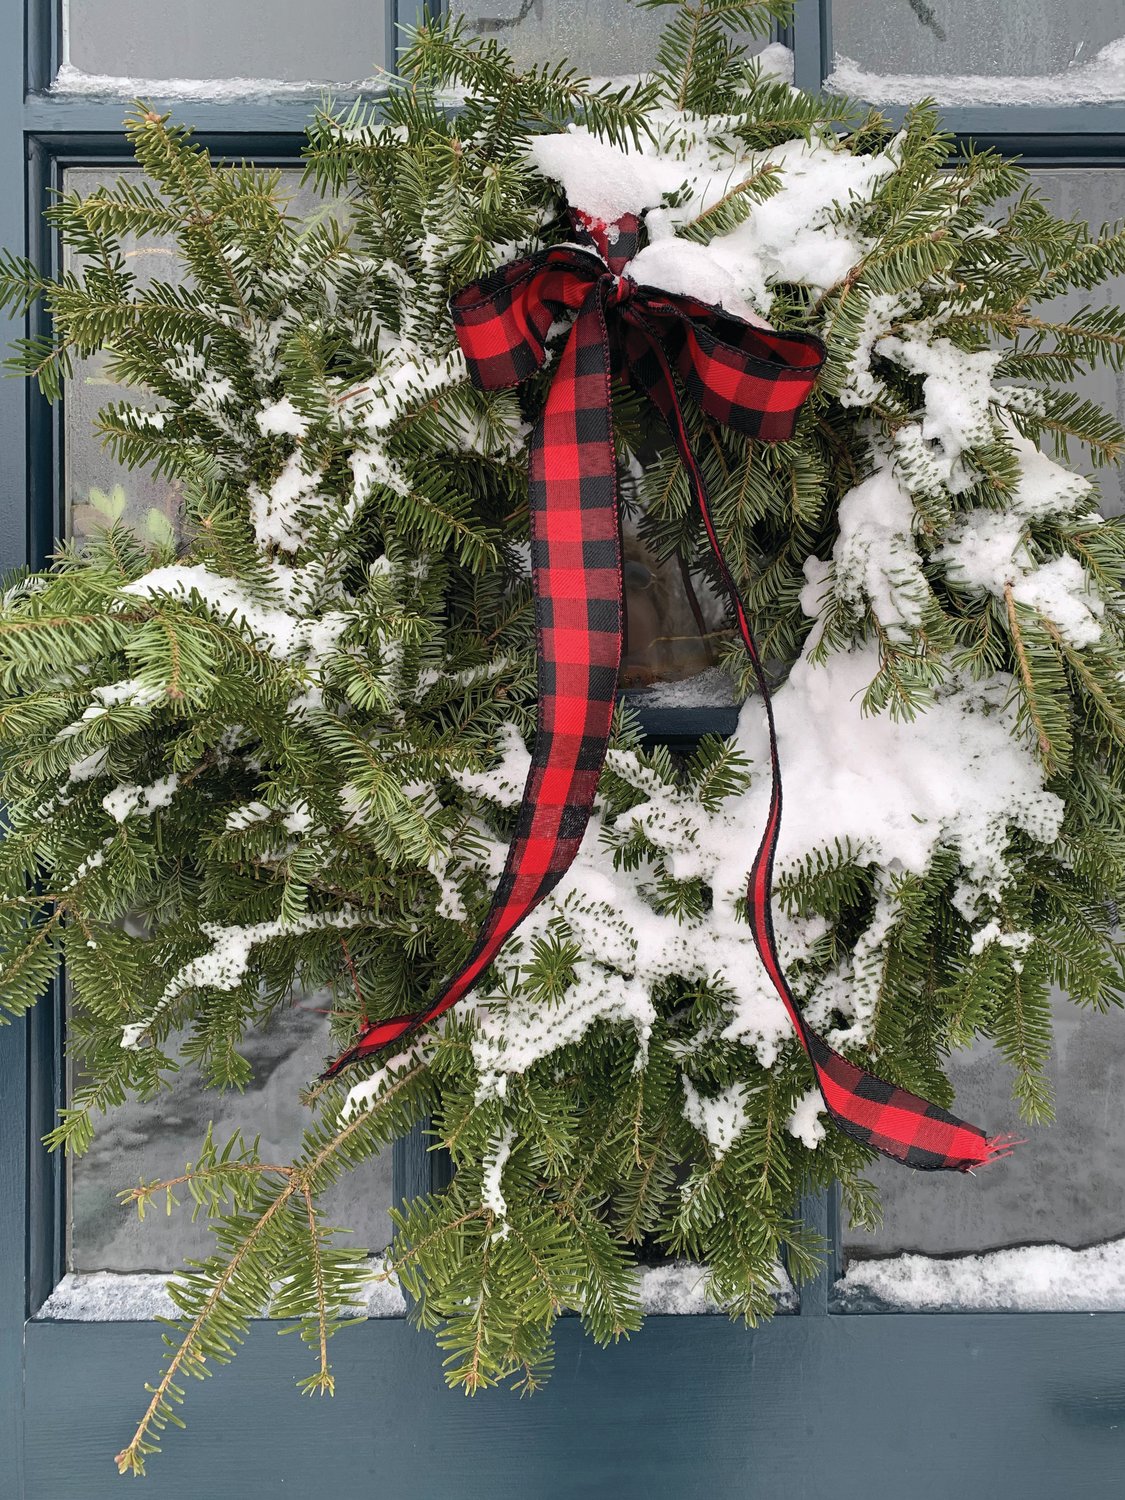 “I like to keep it really simple by adding only a single ribbon, maybe plaid, or whatever I’m in the mood for that year, and tying it on the top.”